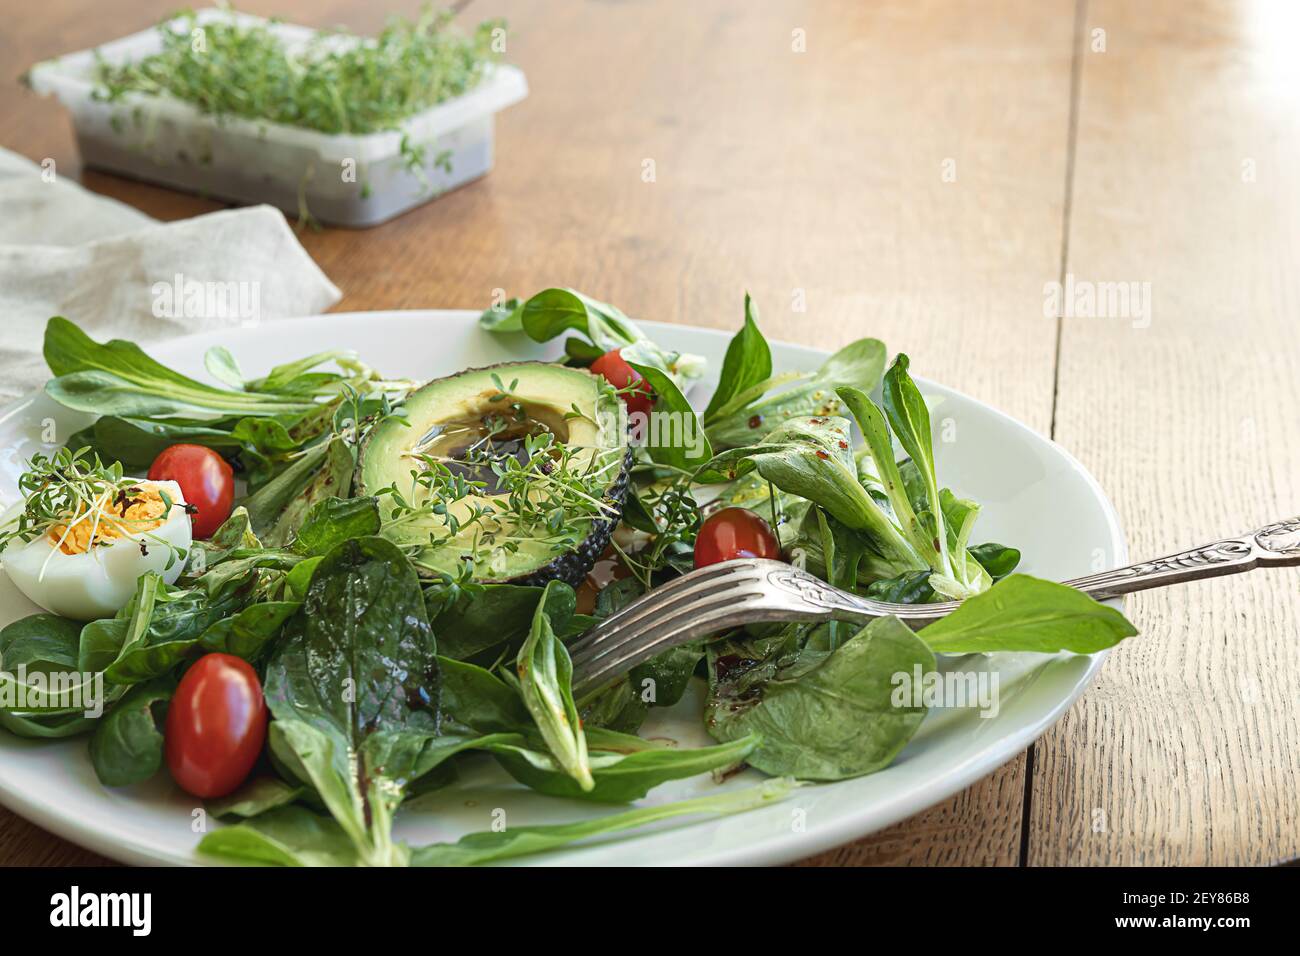 Healthy eating with microgreens - avocado, egg, green salad, cherry tomatoes and watercress sprouts in a white plate on a wooden table Stock Photo